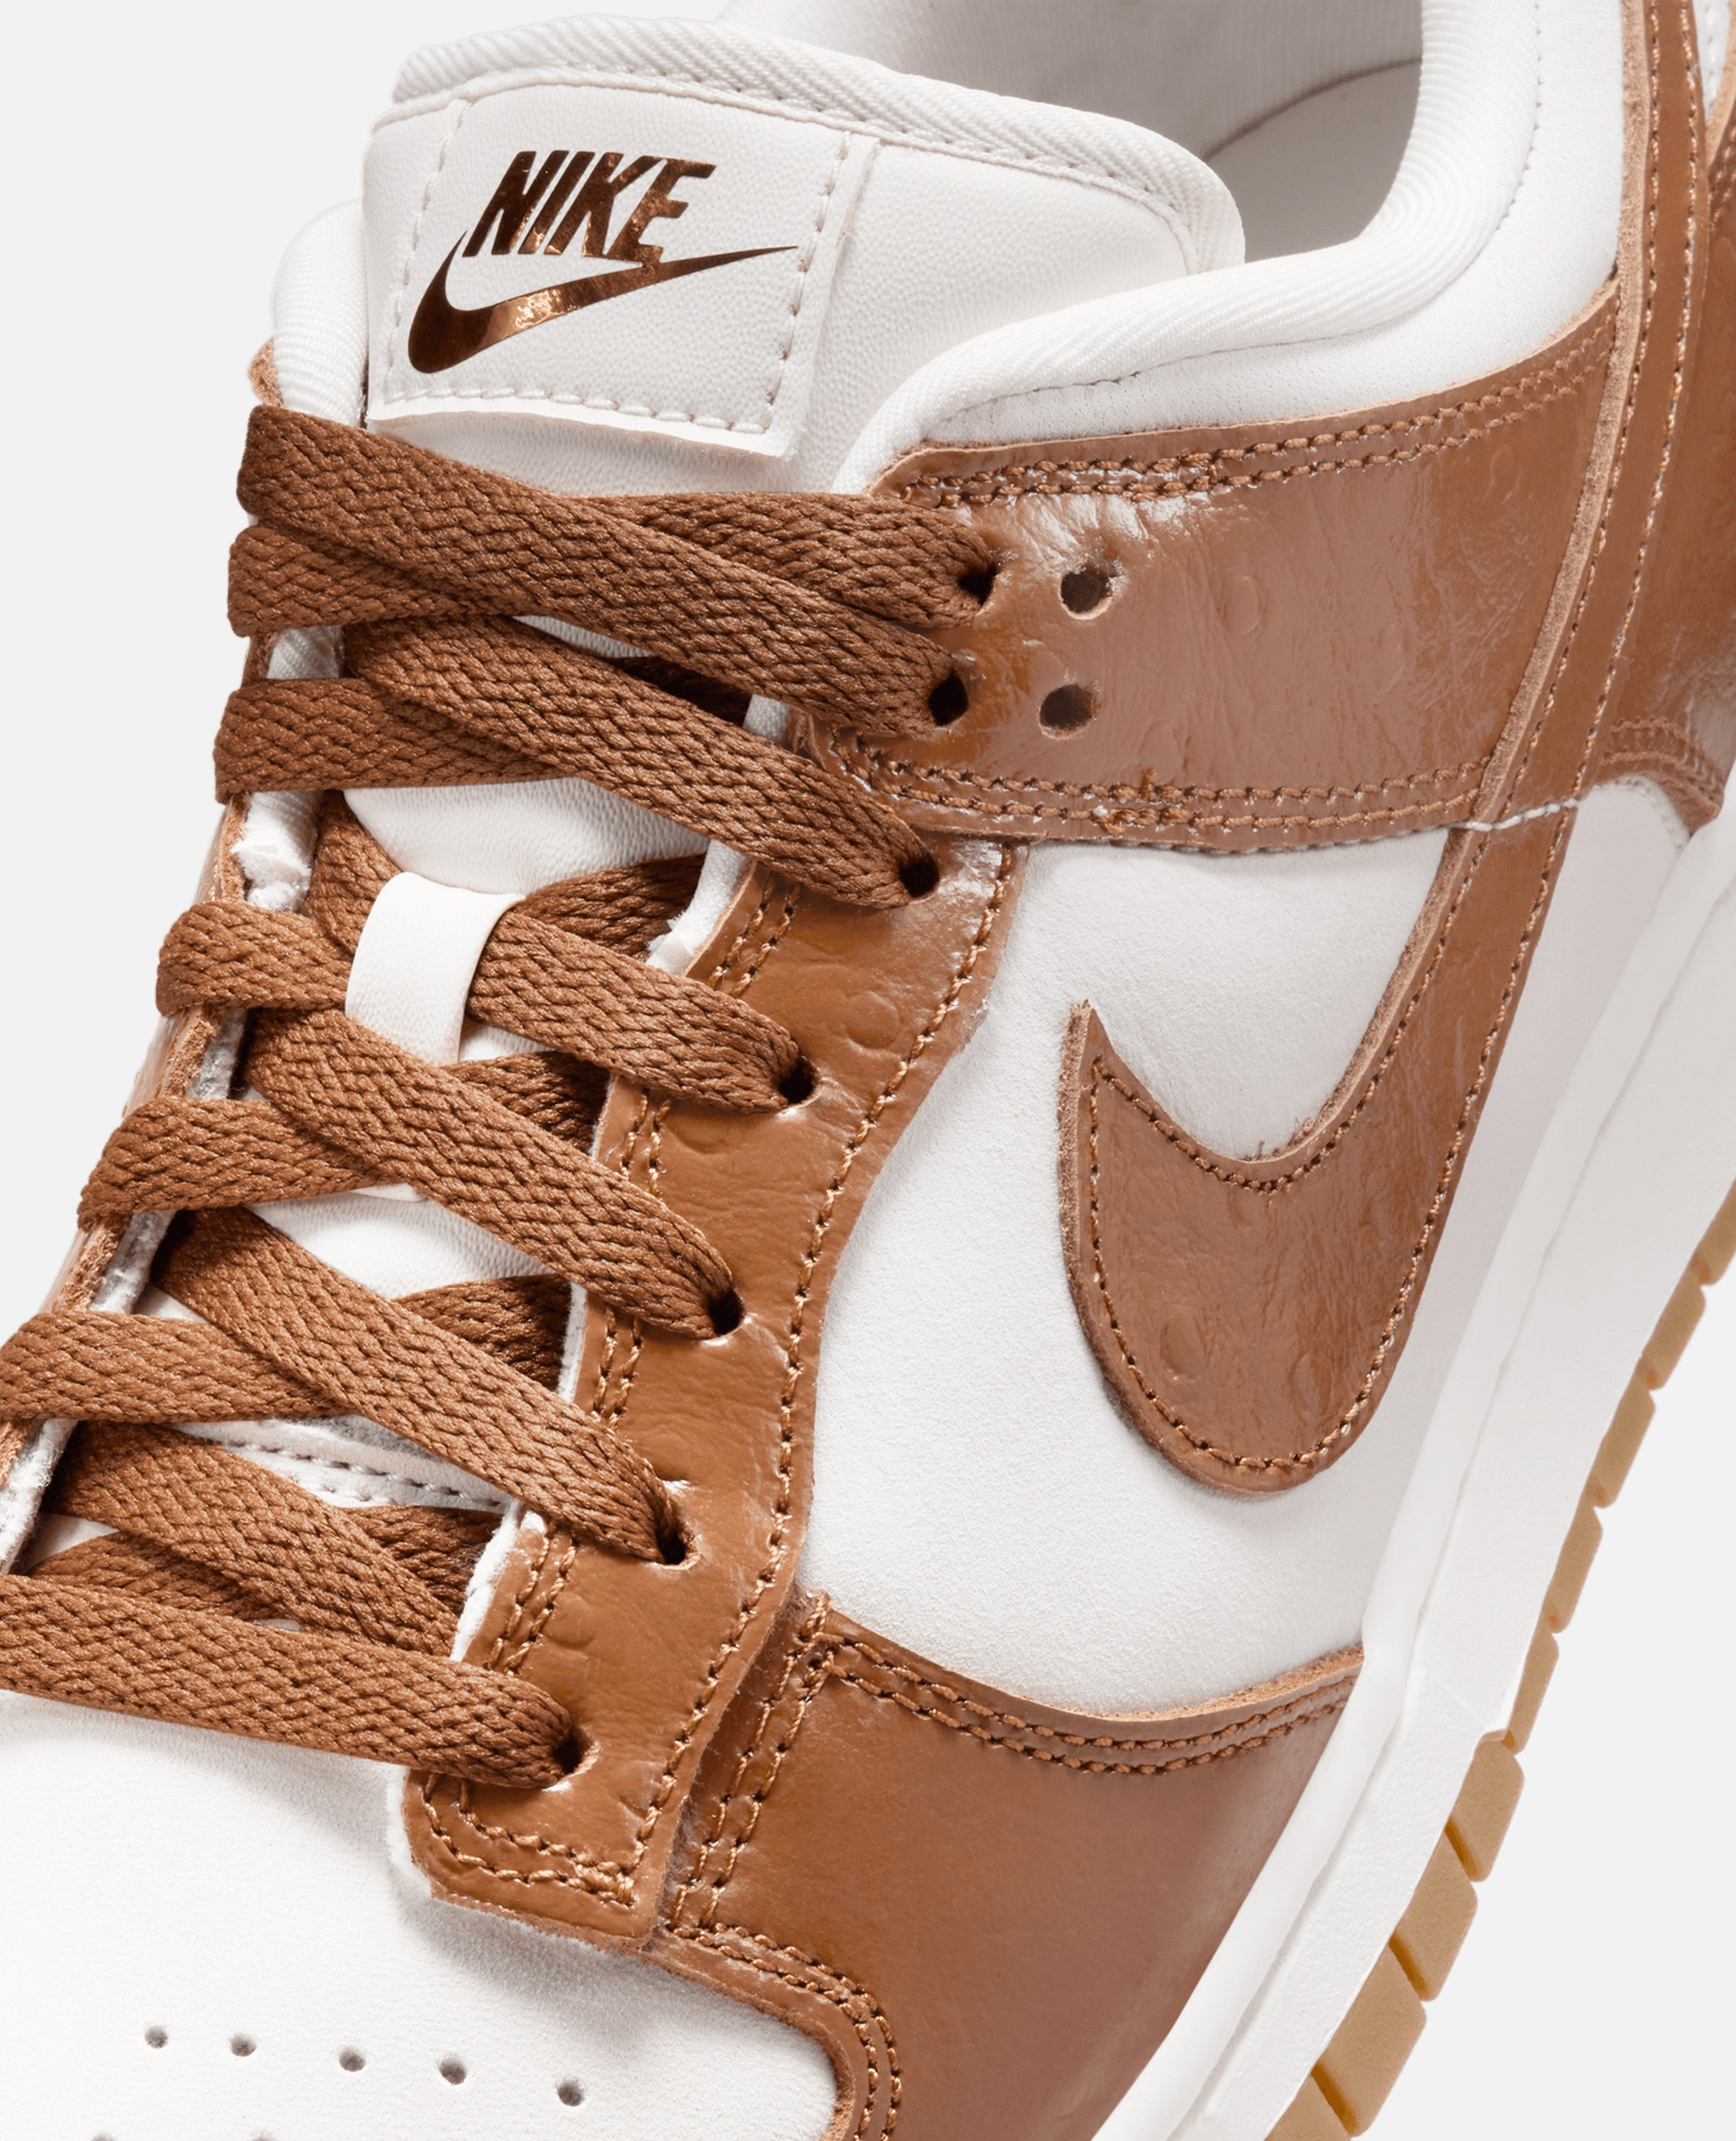 SALE爆買いNike WMNS Dunk Low Brown/Sail ダンク ブラウン 靴